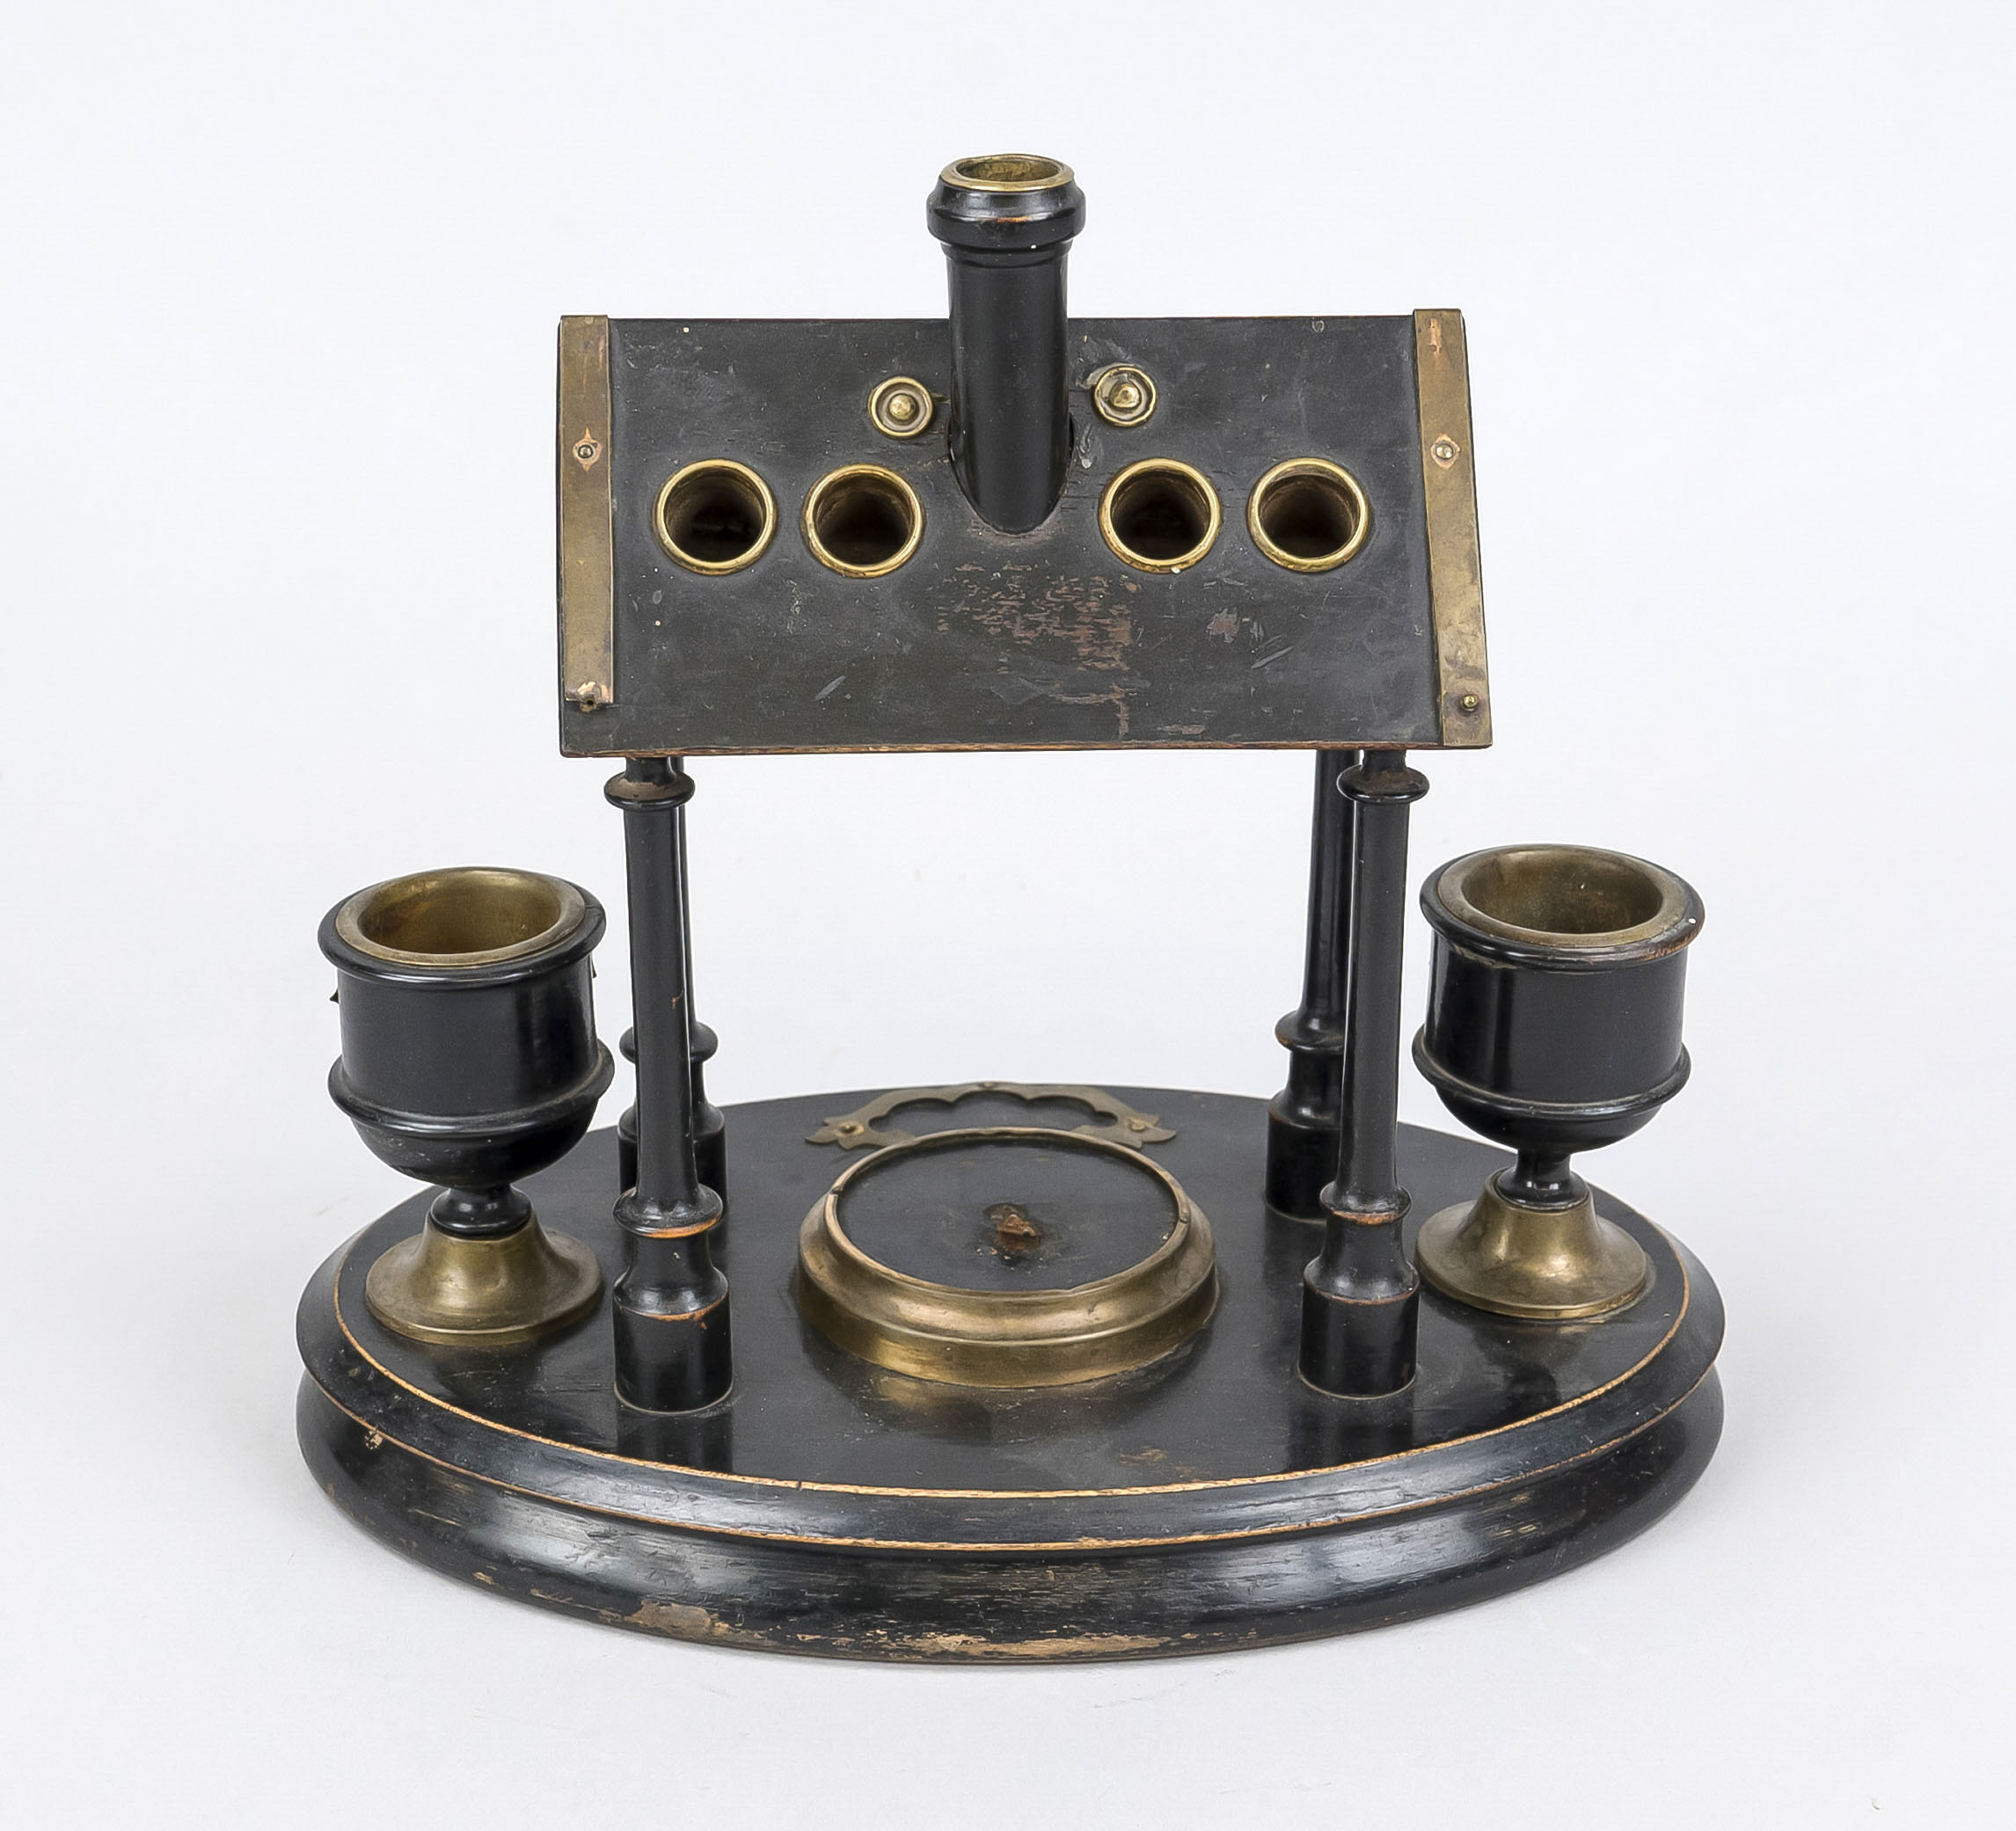 Smoking set with match holder, 2nd half 19th century, black lacquered wood with brass fittings,